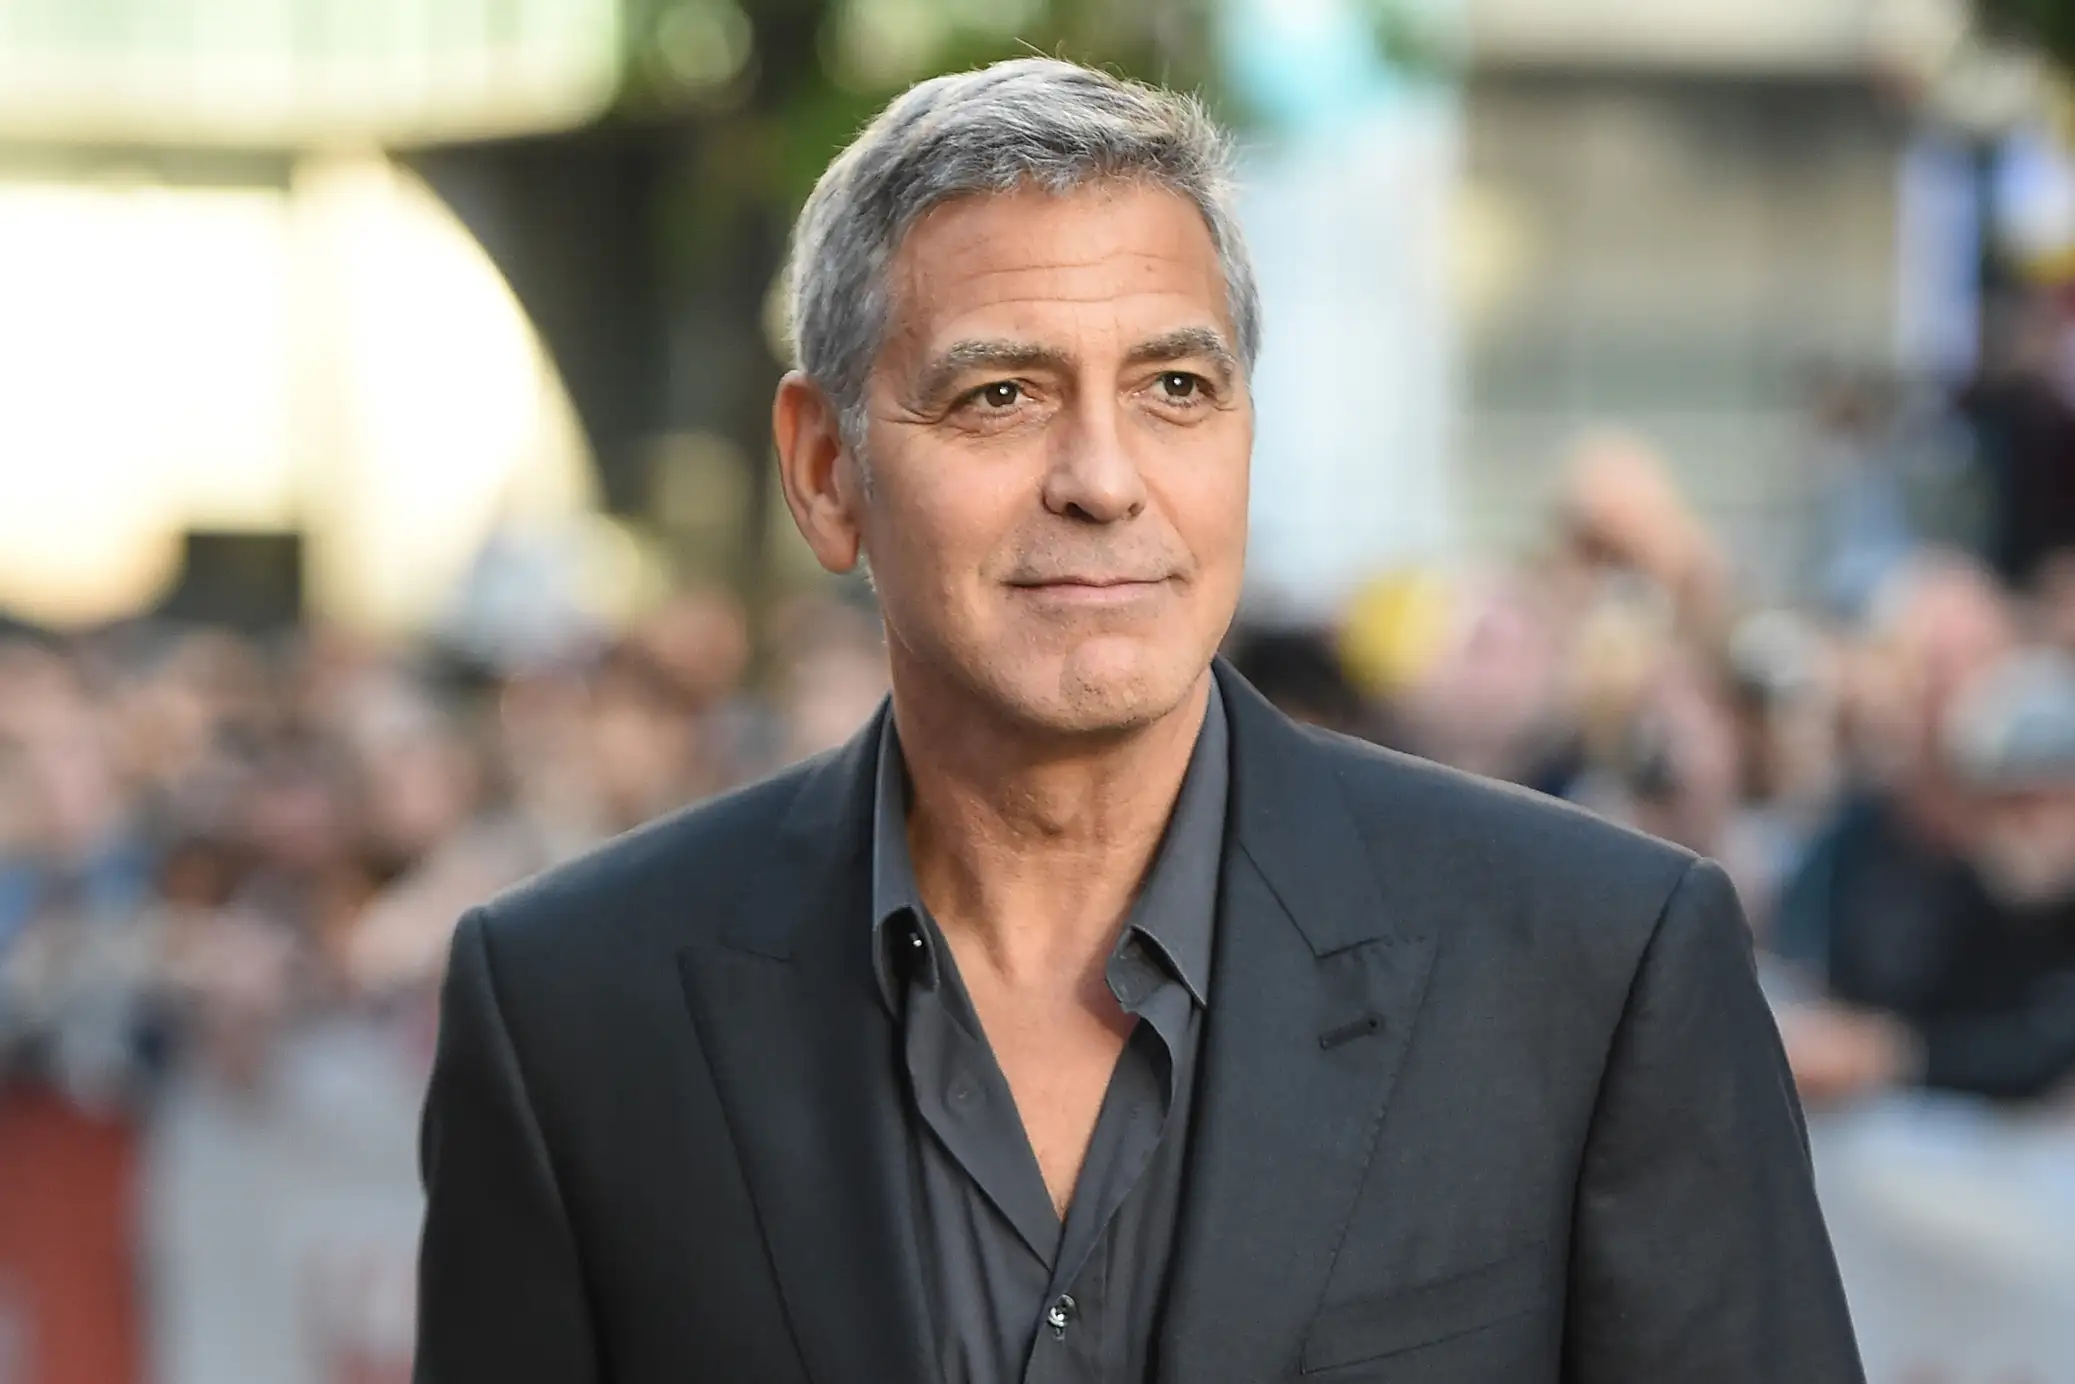 180117-celebrity-investments-george-clooney